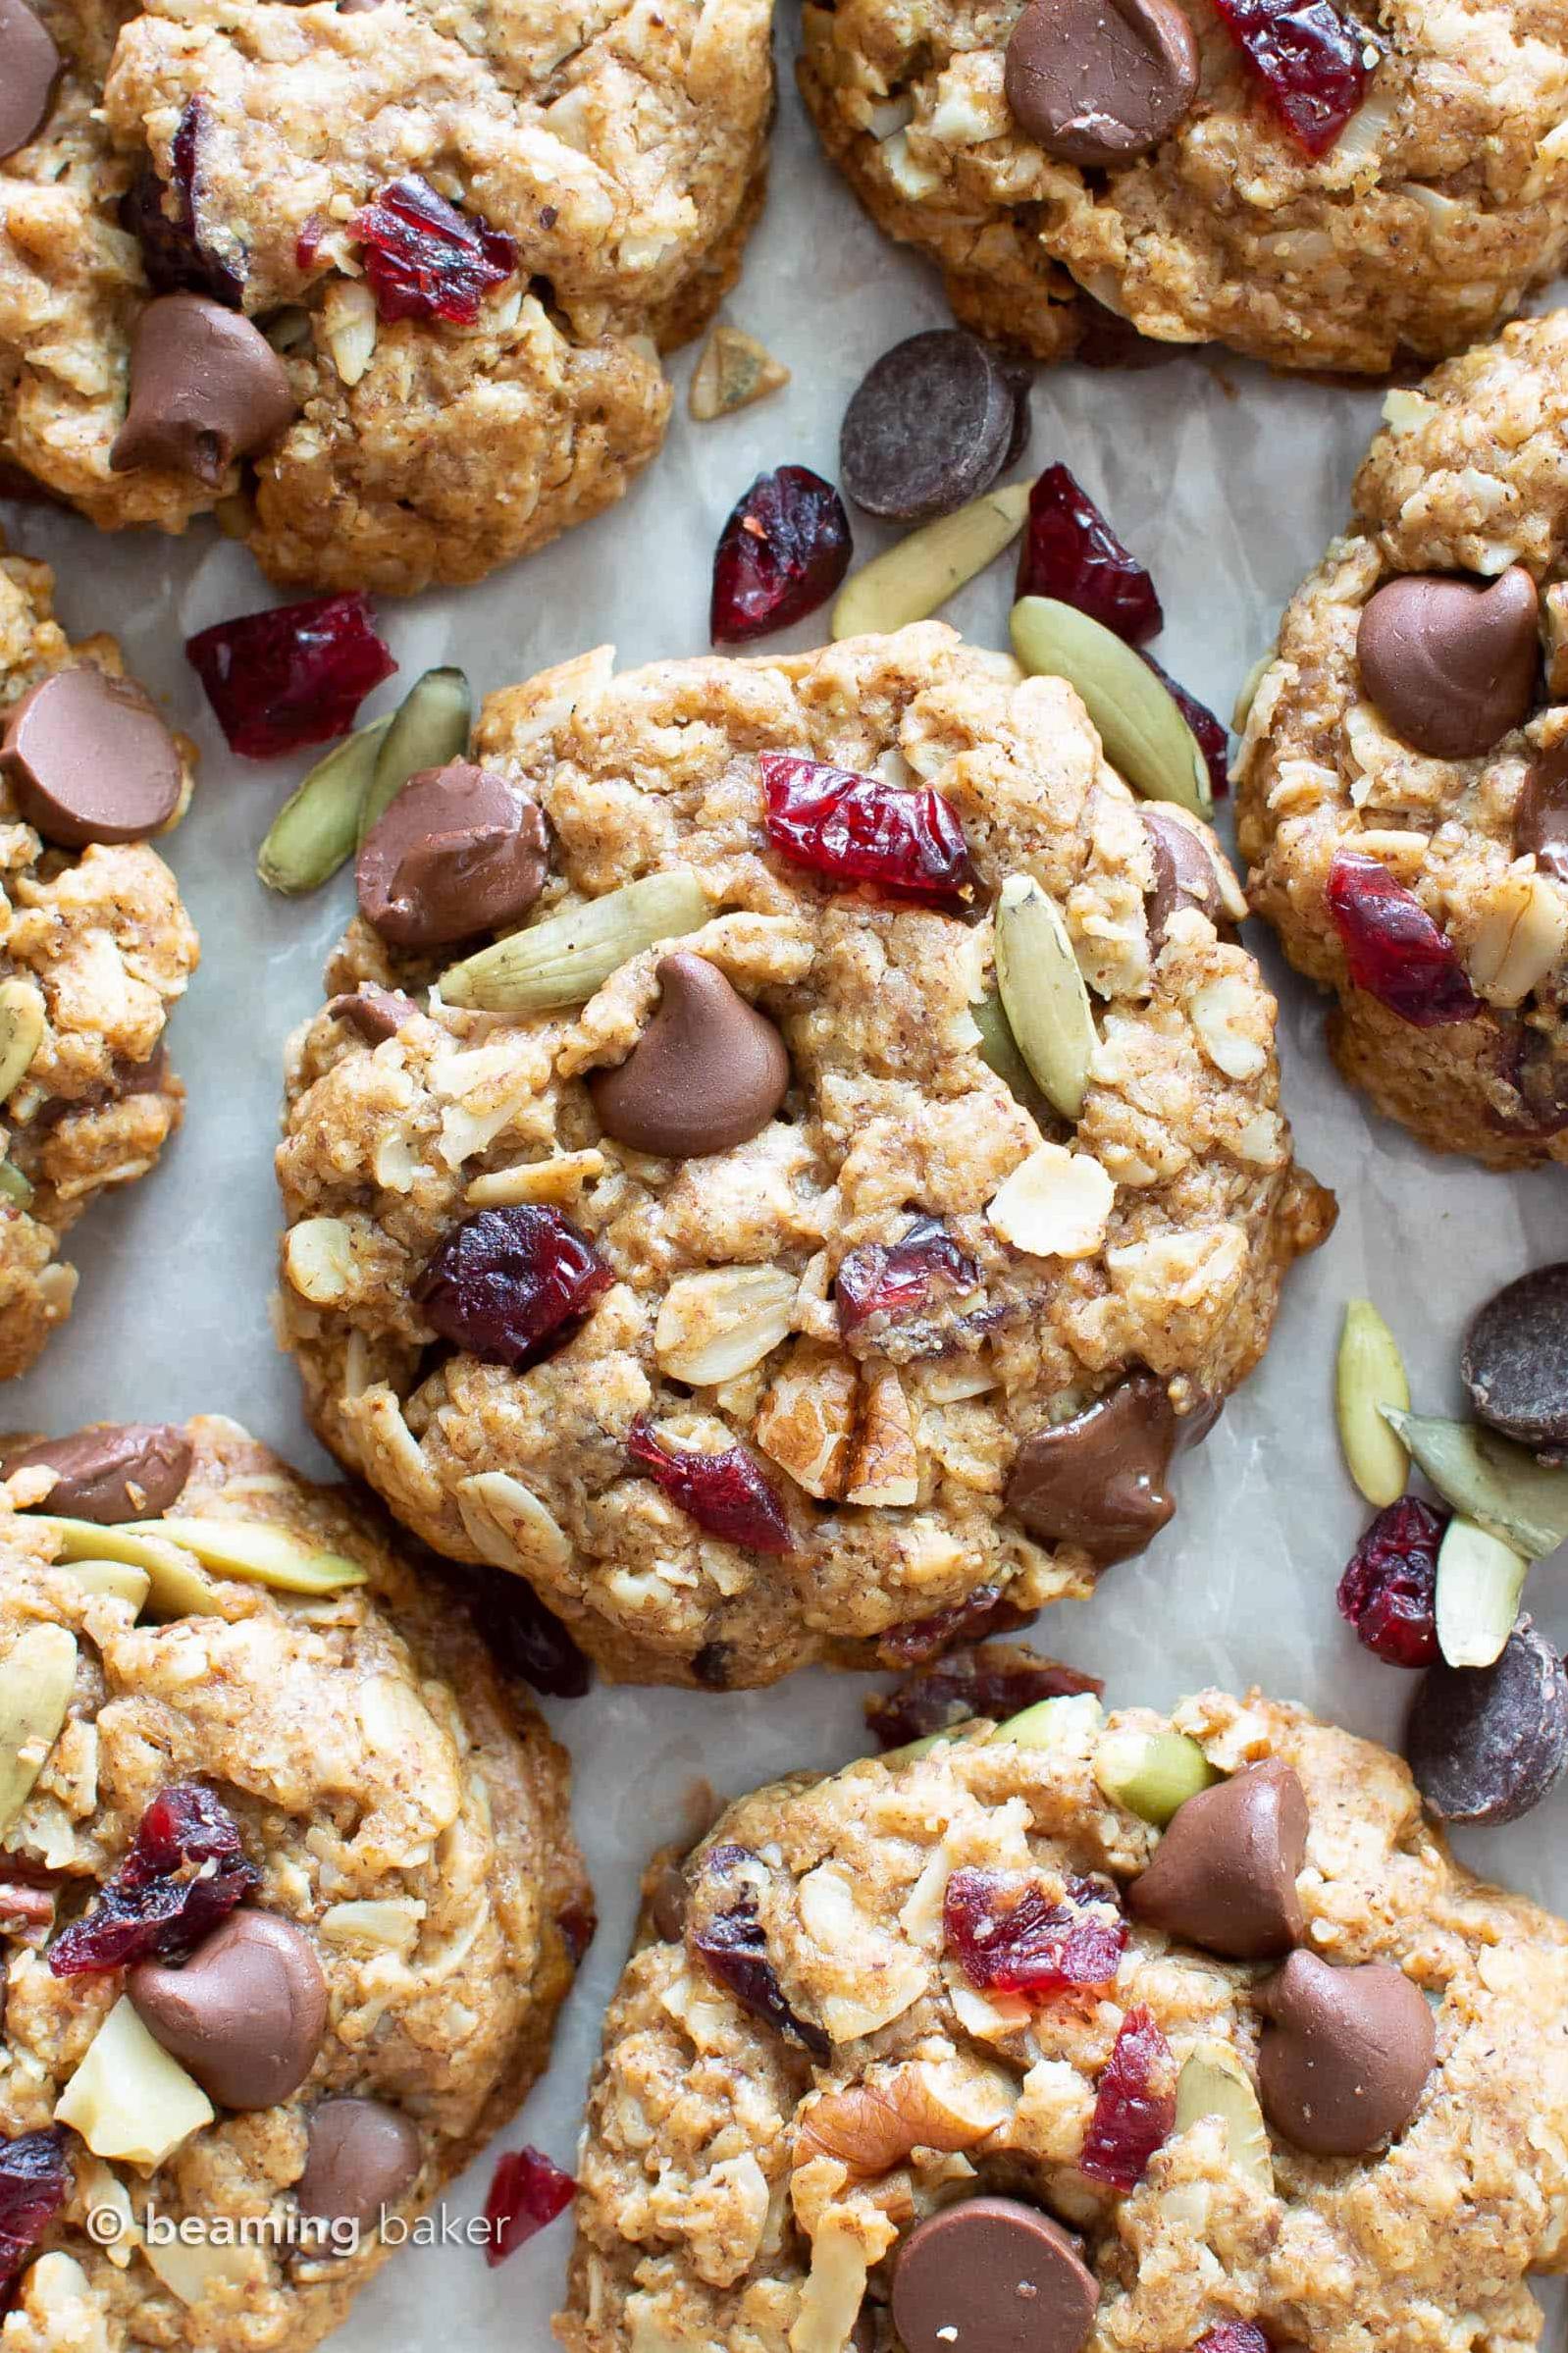  The combination of millet, oats, and trail mix makes these cookies a delicious and filling treat.